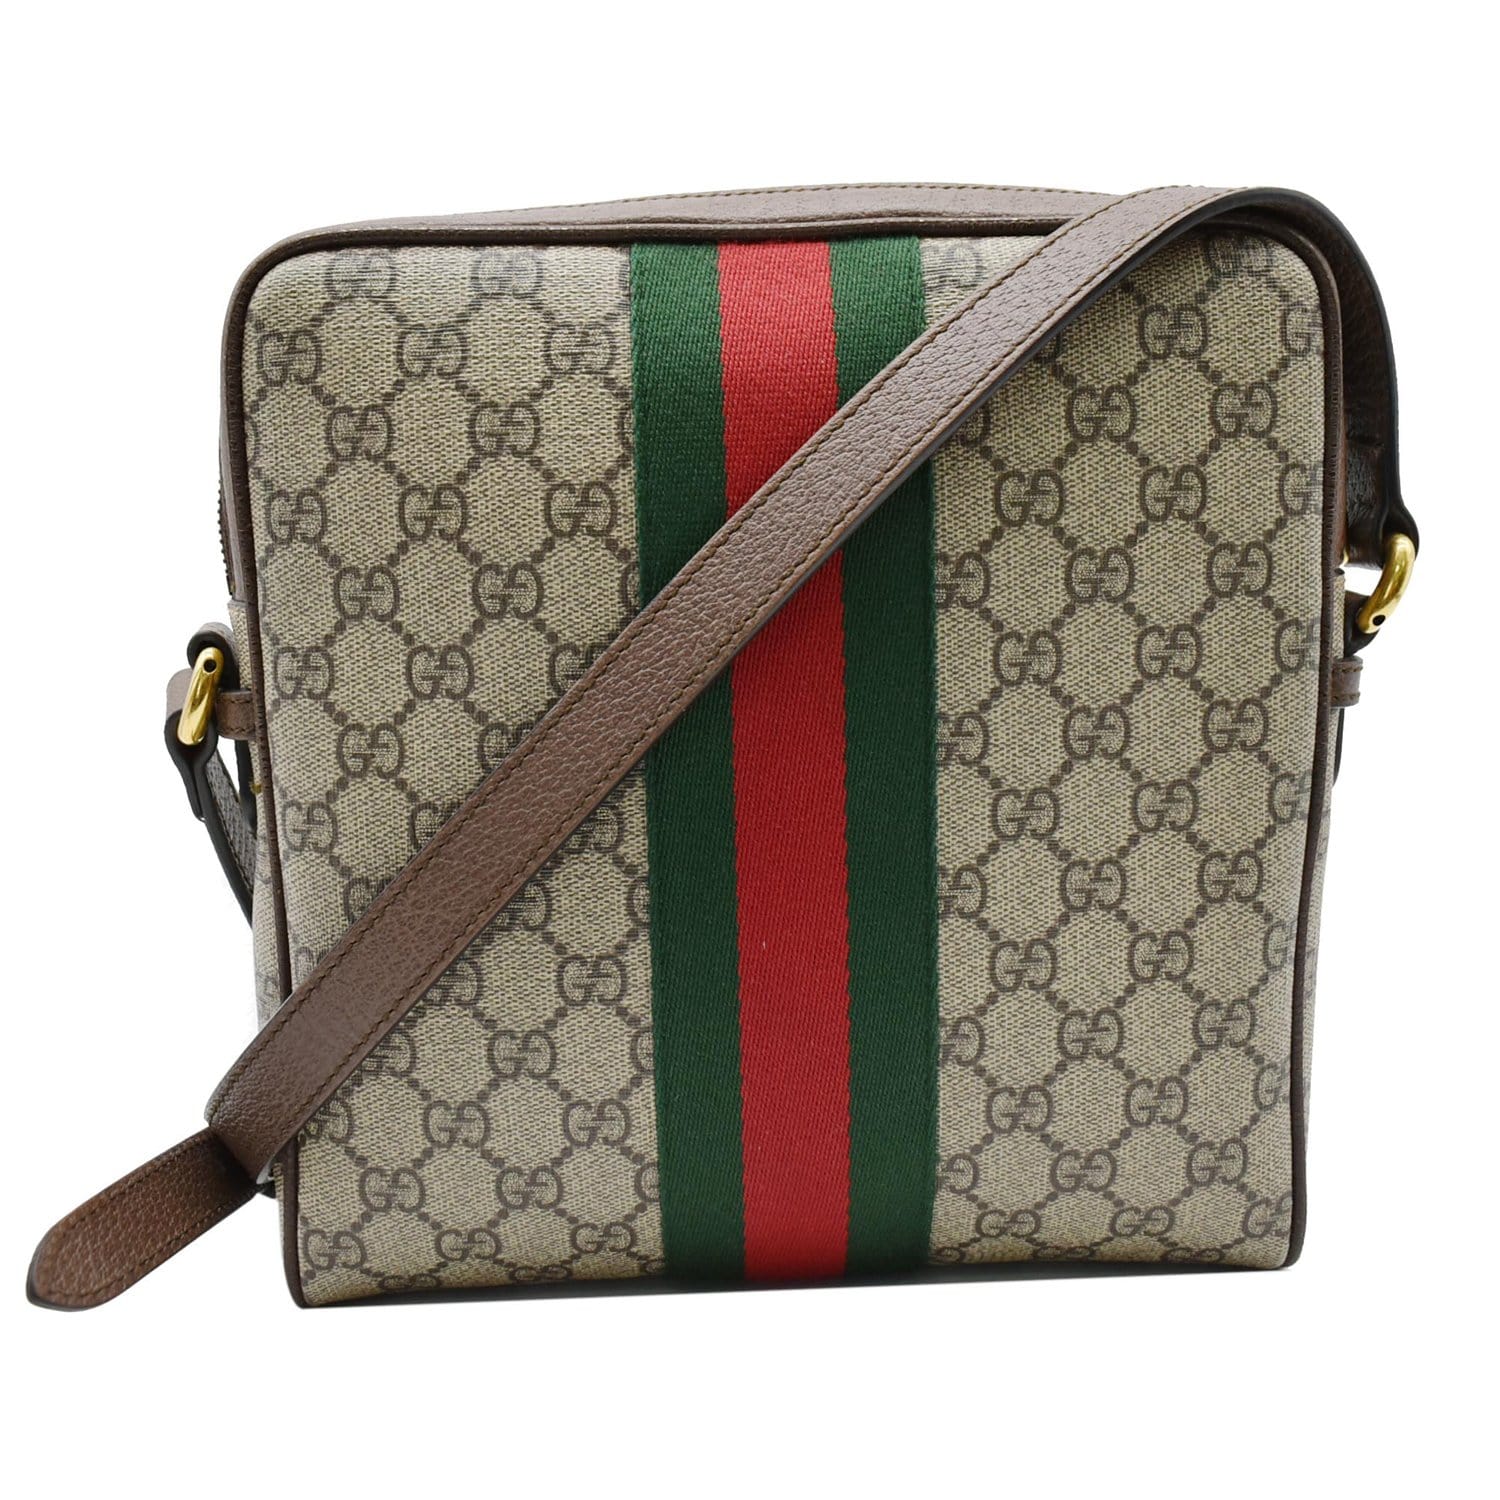 Gucci Beige & Brown Small Ophidia Messenger Bag for Men